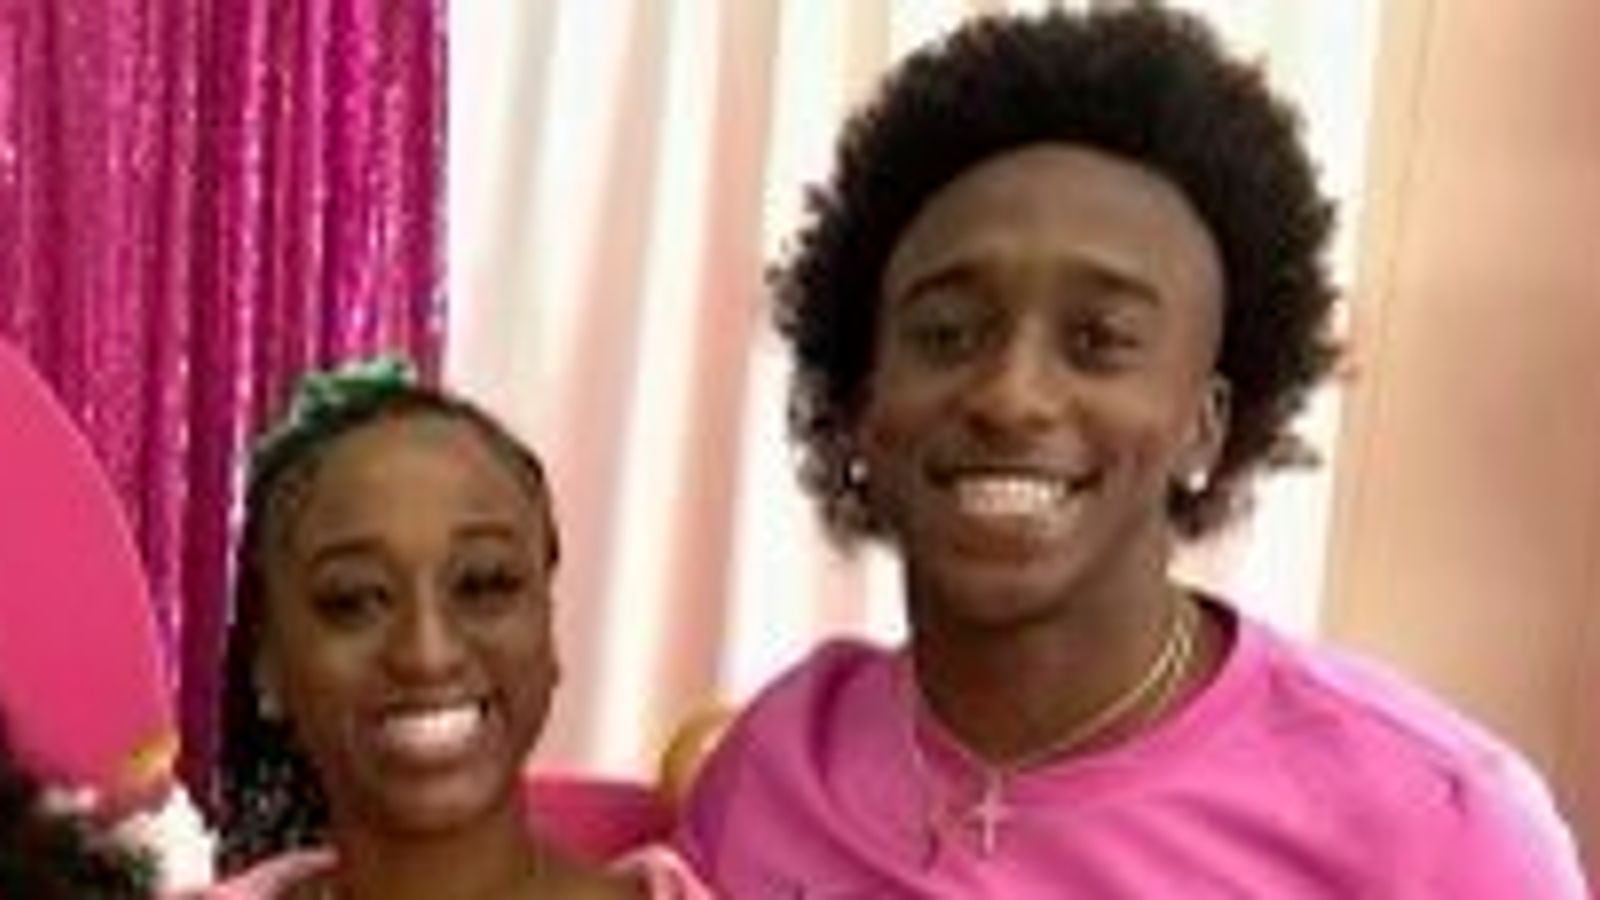 Alabama: Two teenagers charged with murder after mass shooting at girl's 16th birthday party left four dead and 32 wounded